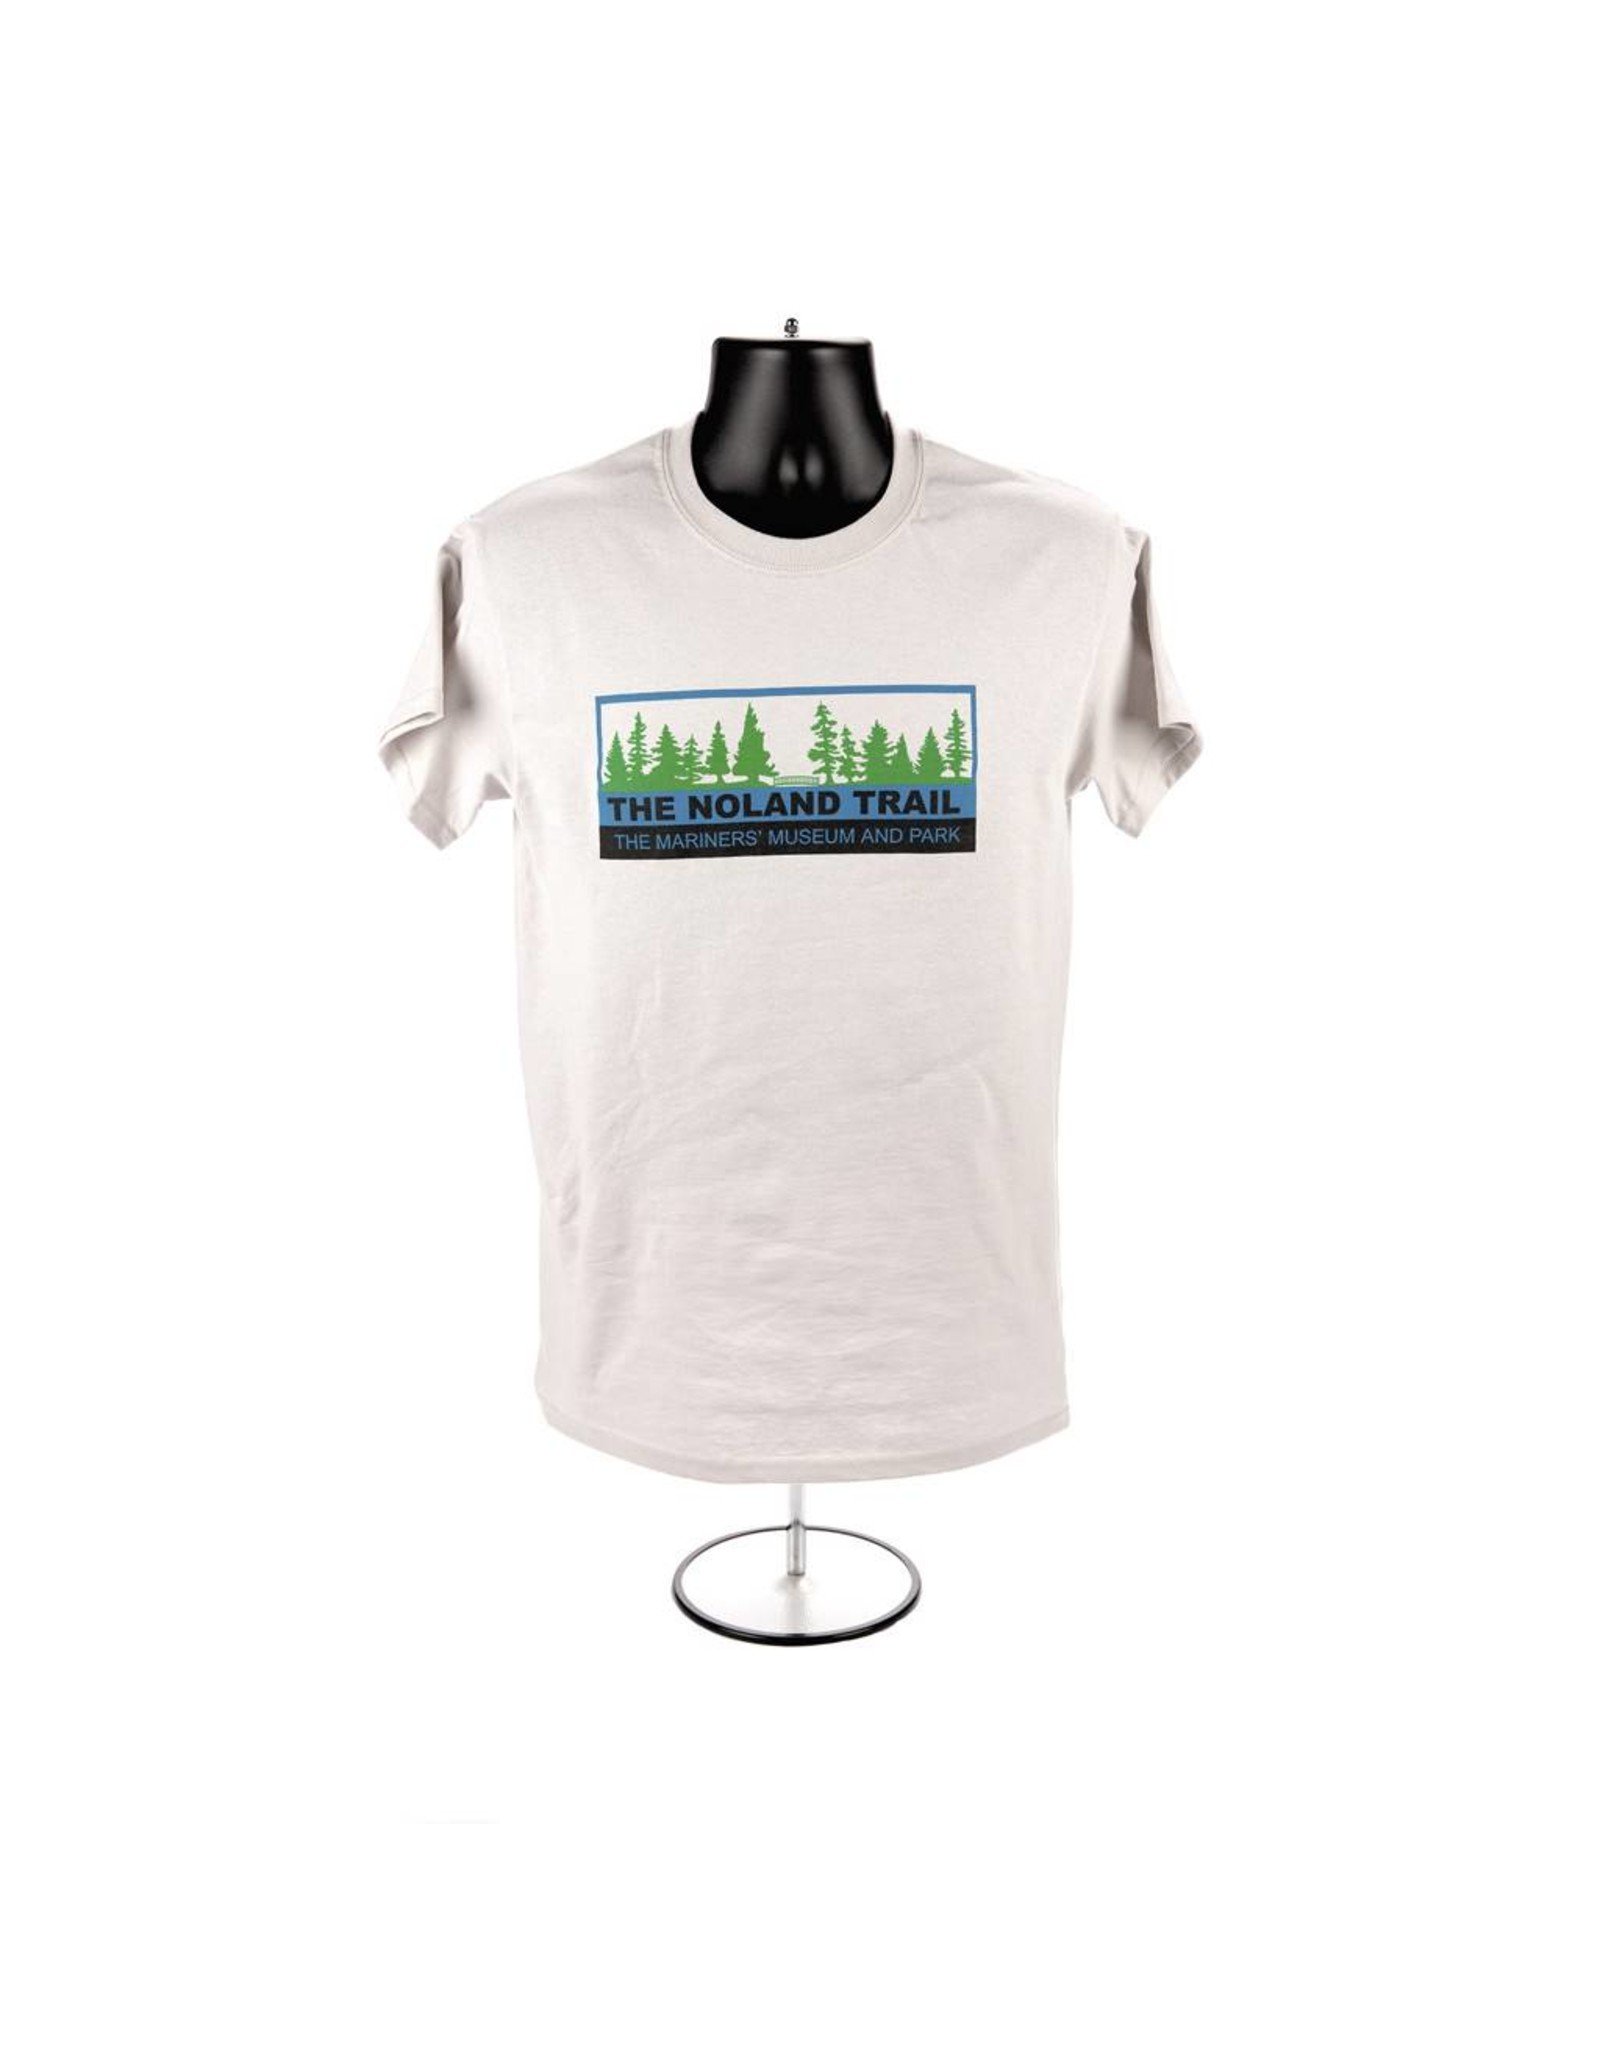 Vintage Noland Trail T-Shirt - The Mariners' Museum Gift Shop